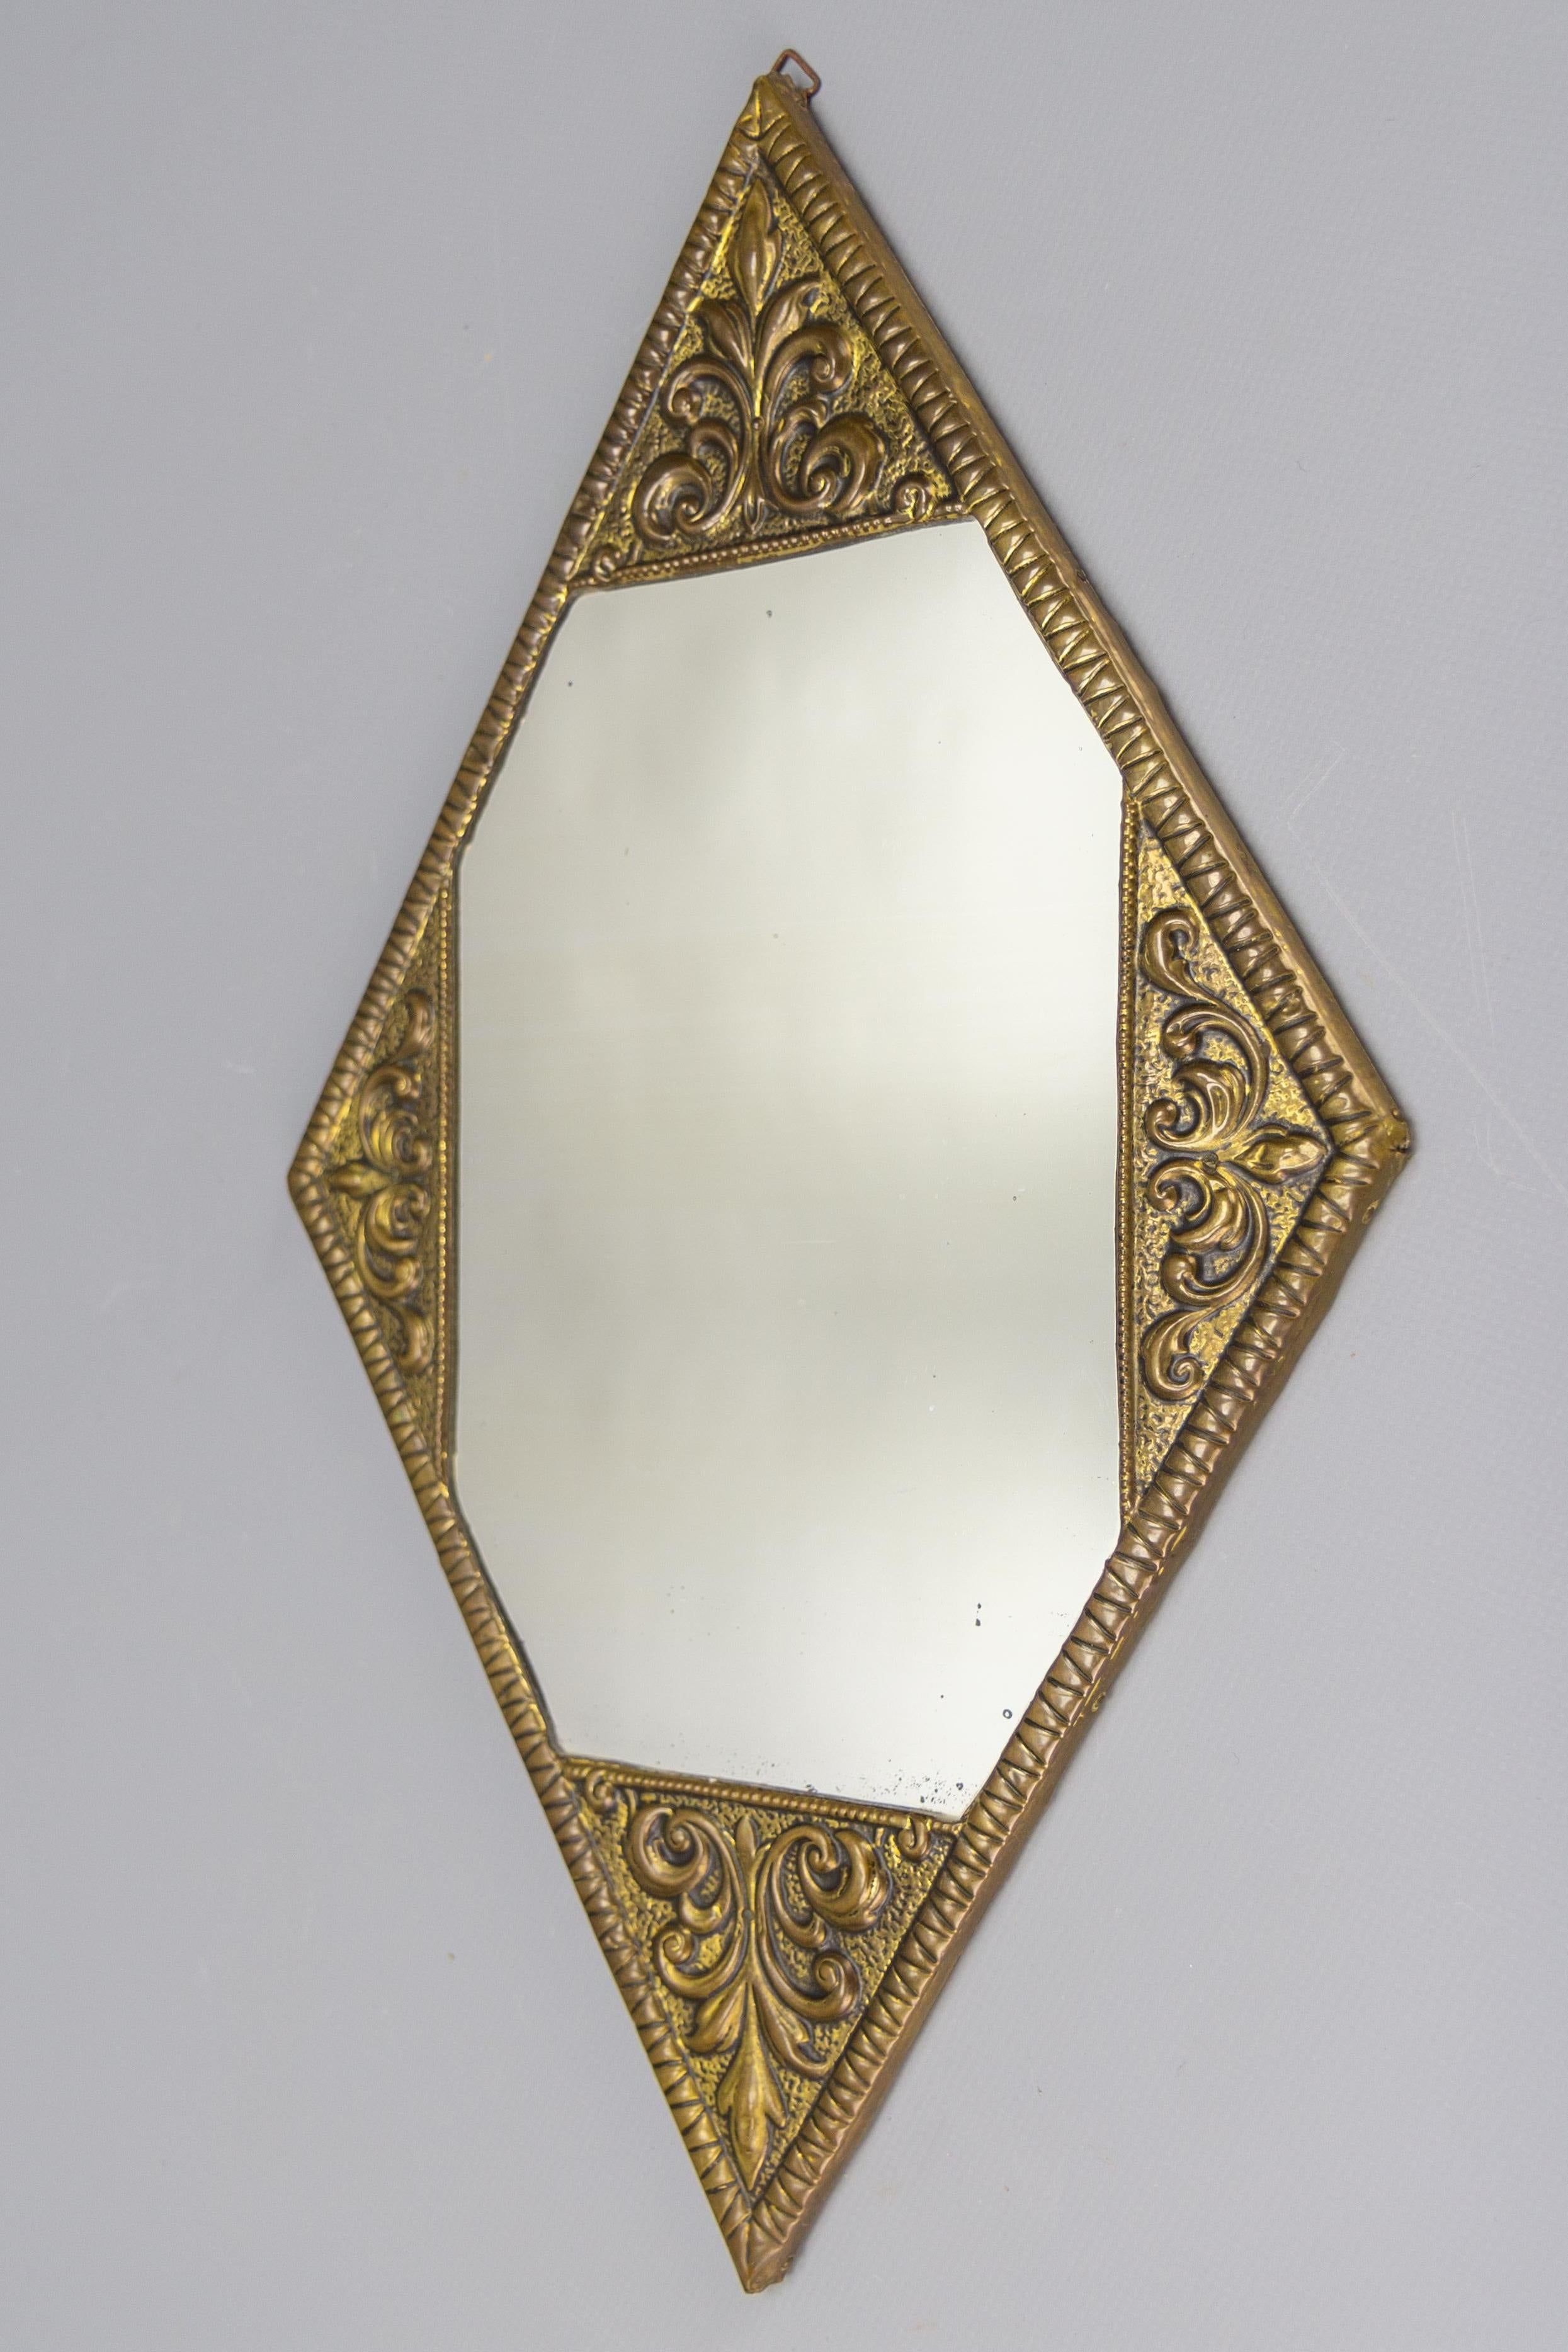 Art Deco diamond-shaped brass frame wall mirror, from ca. 1920.
This adorable Art Deco period diamond - or rhombus-shaped wall mirror features an ornate brass frame and wooden backside.
Dimensions: height: 41 cm / 16.14 in; width: 24 cm / 9.45 in;